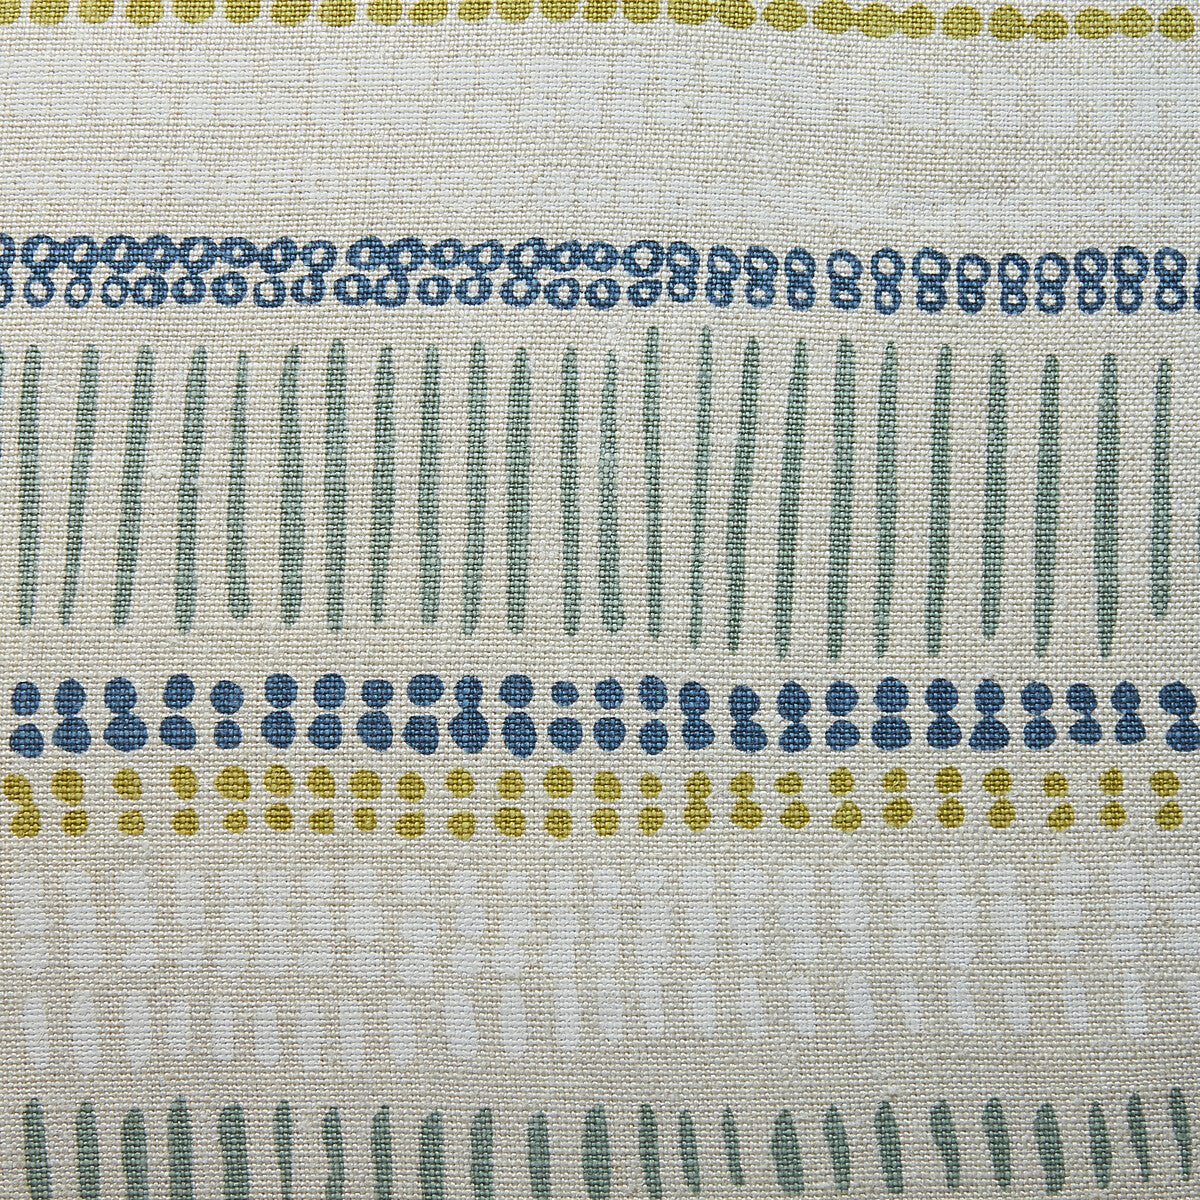 Saybrook fabric in blue/aqua/lm color - pattern BFC-3634.513.0 - by Lee Jofa in the Blithfield collection